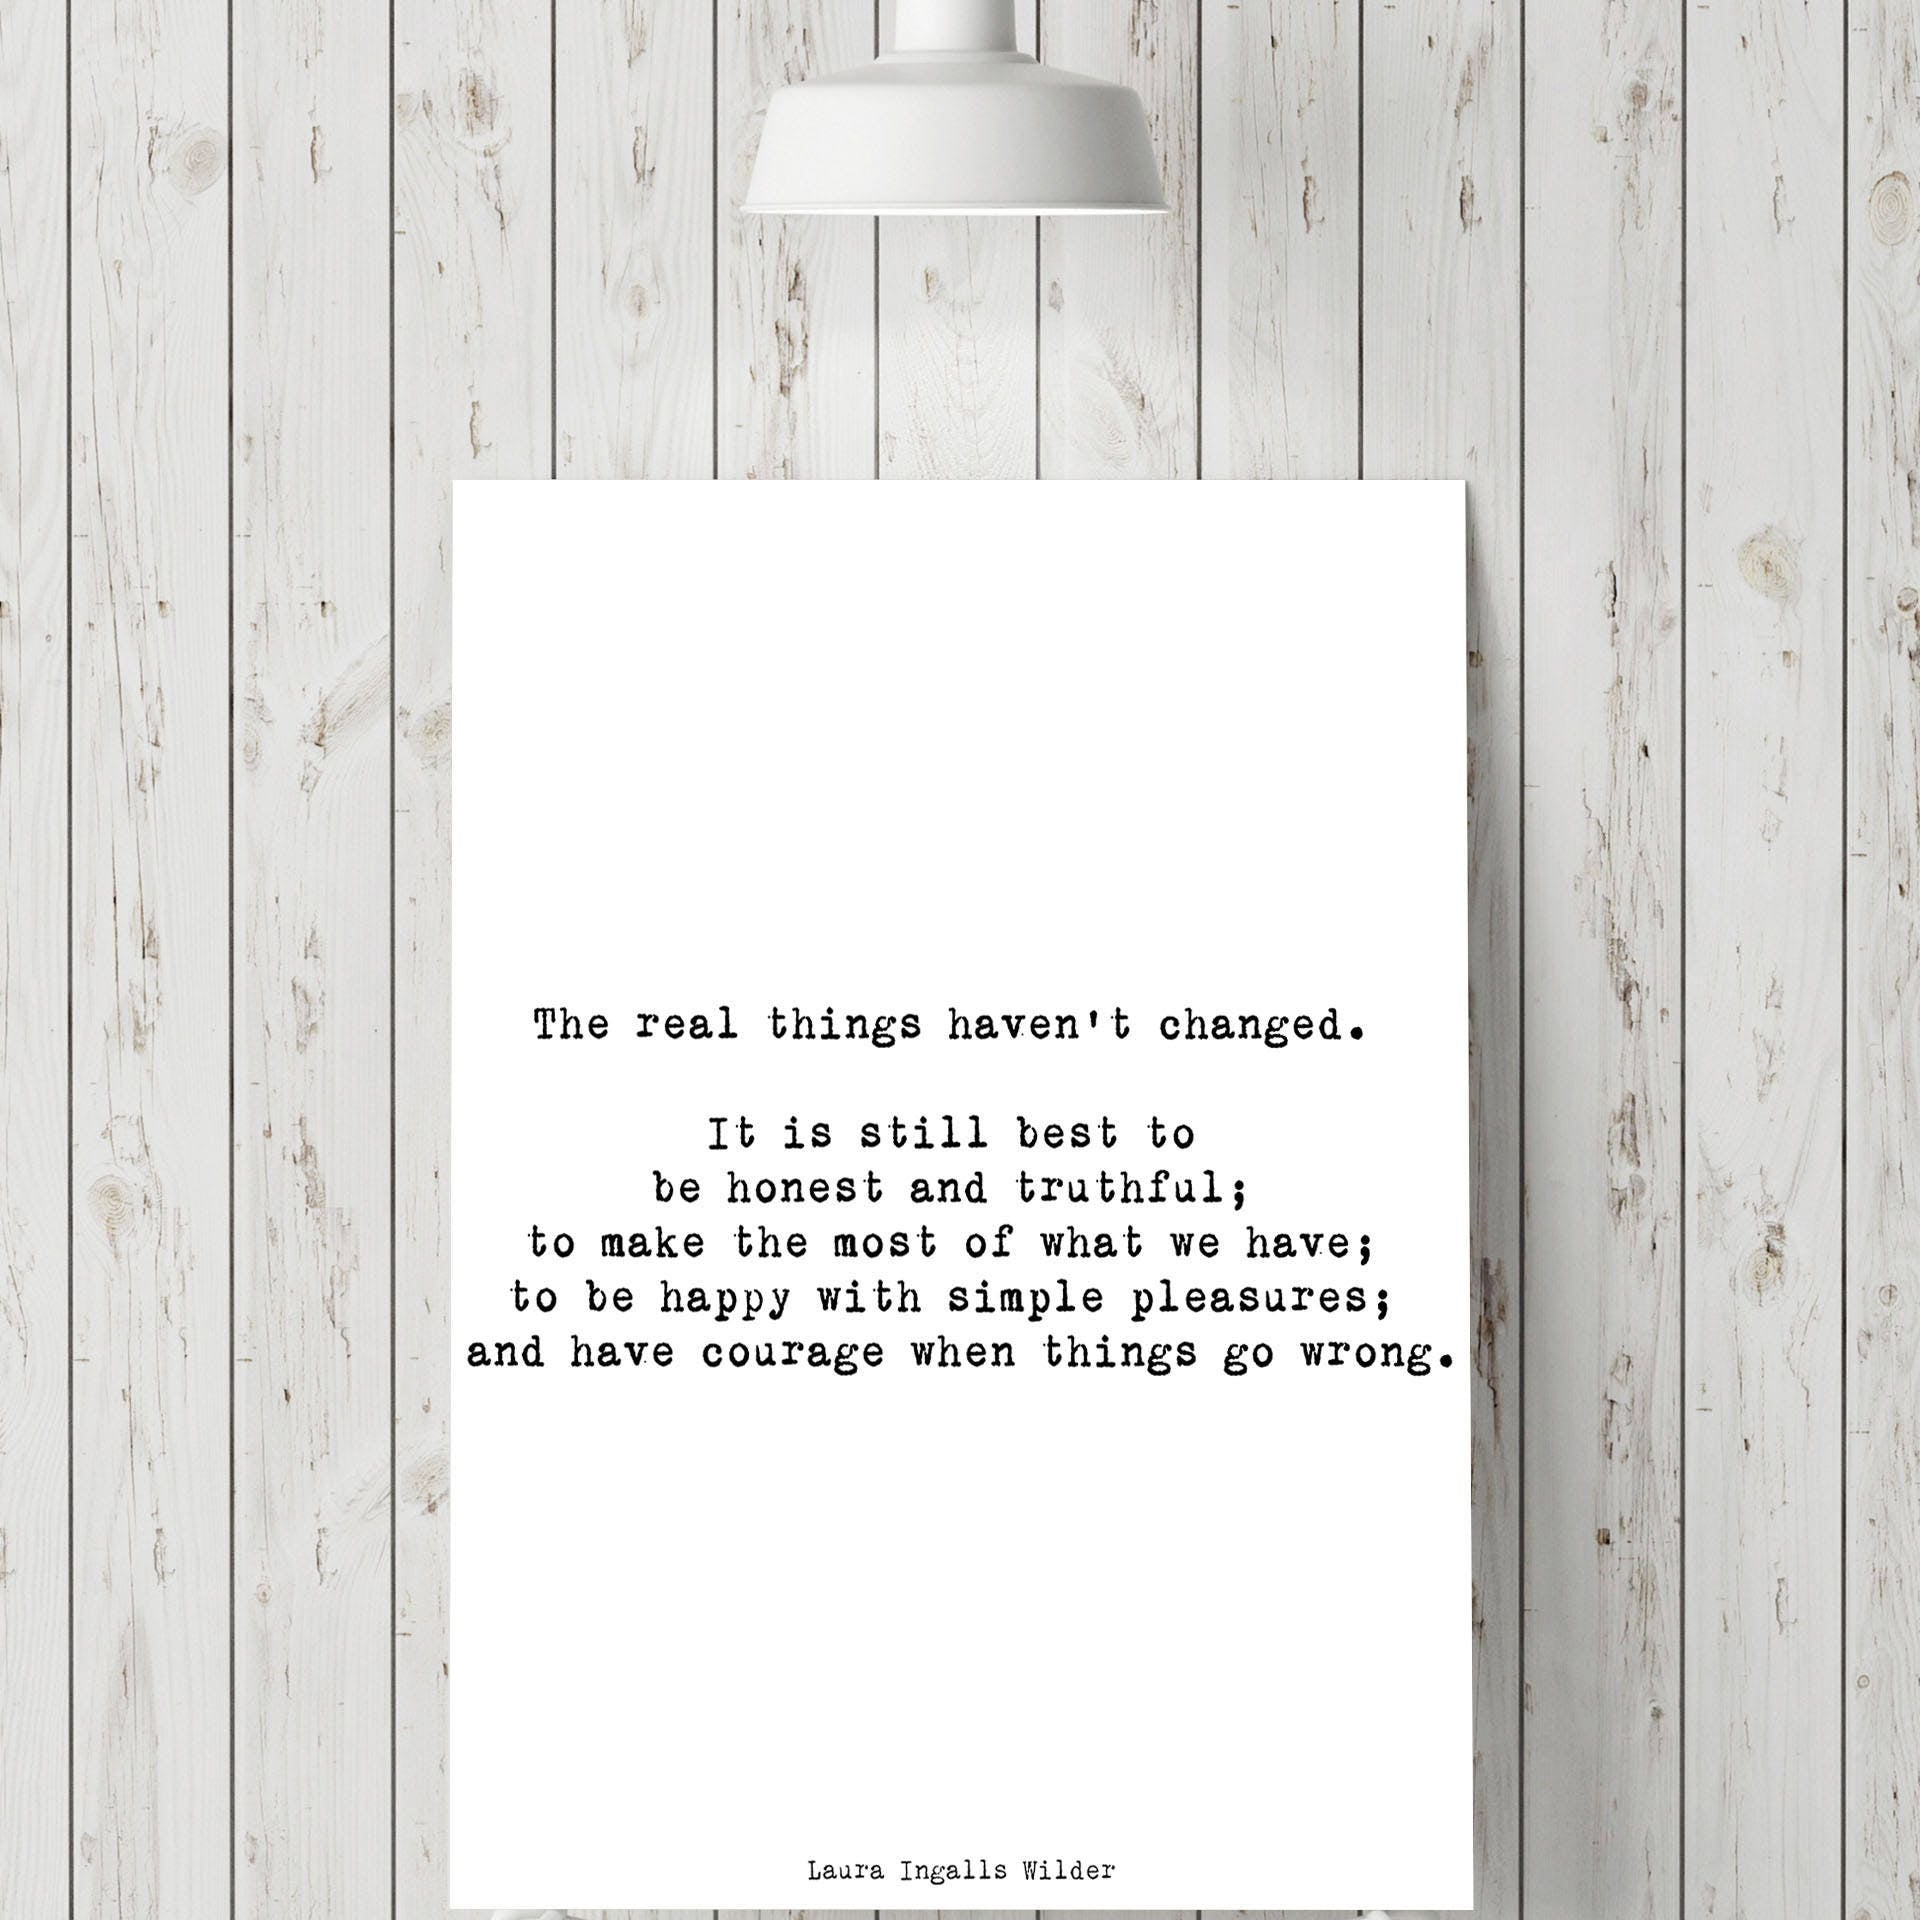 Laura Ingalls Wilder The Real Things Haven't Changed Unframed Inspirational Wall Art Quote Print, Typography Wall Decor in Black & White